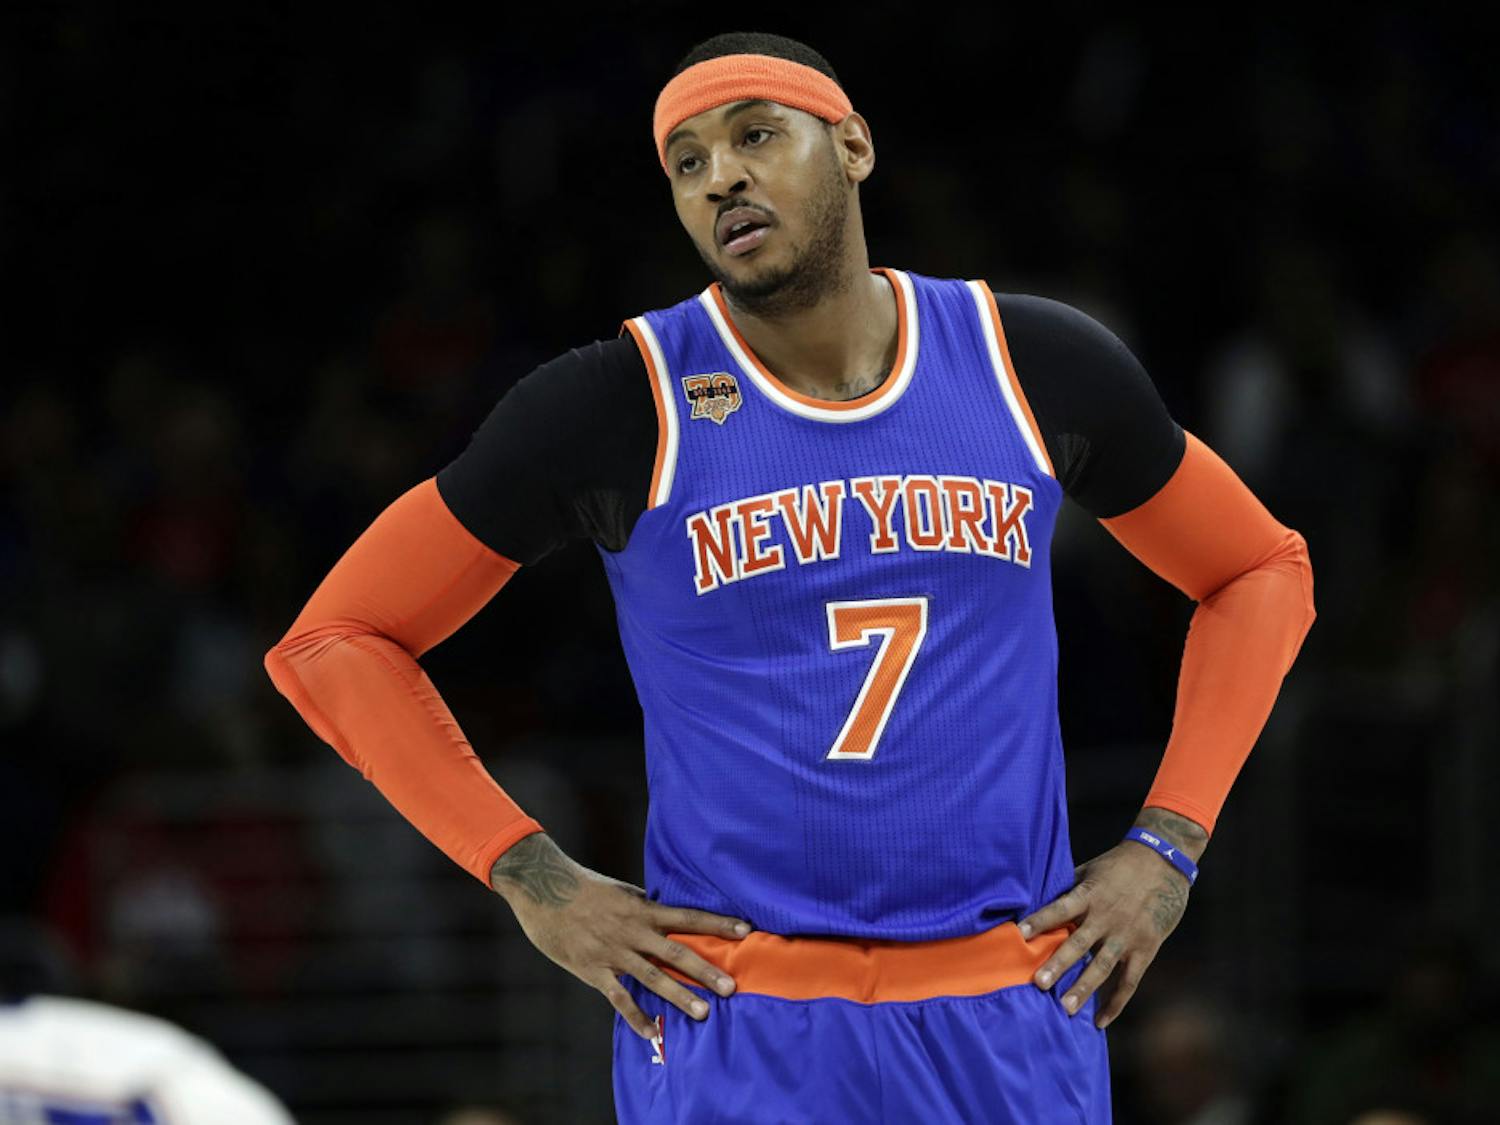 FILE - In this Jan. 11, 2017, file photo, New York Knicks' Carmelo Anthony looks on during a break in an NBA basketball game against the Philadelphia 76ers in Philadelphia. Phil Jackson may be trying to trade Anthony because he's given up trying to change him. That seemed to be the conclusion when the Knicks president of basketball operations broke his Twitter silence with a tweet that was another dig at the star forward. (AP Photo/Matt Slocum, File)